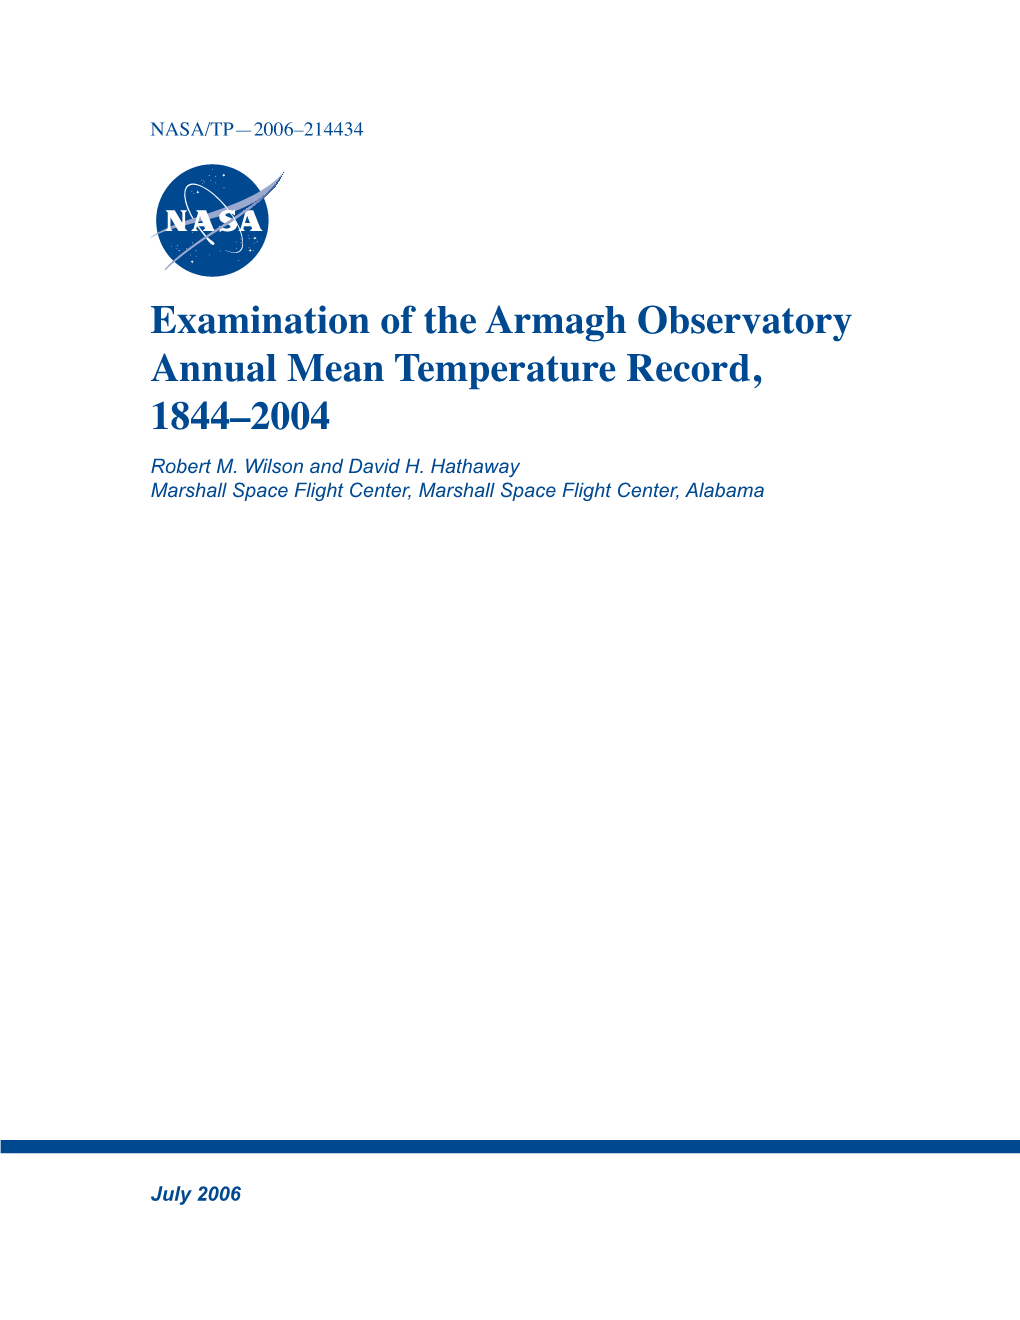 Examination of the Armagh Observatory Annual Mean Temperature Record, 1844–2004 Robert M